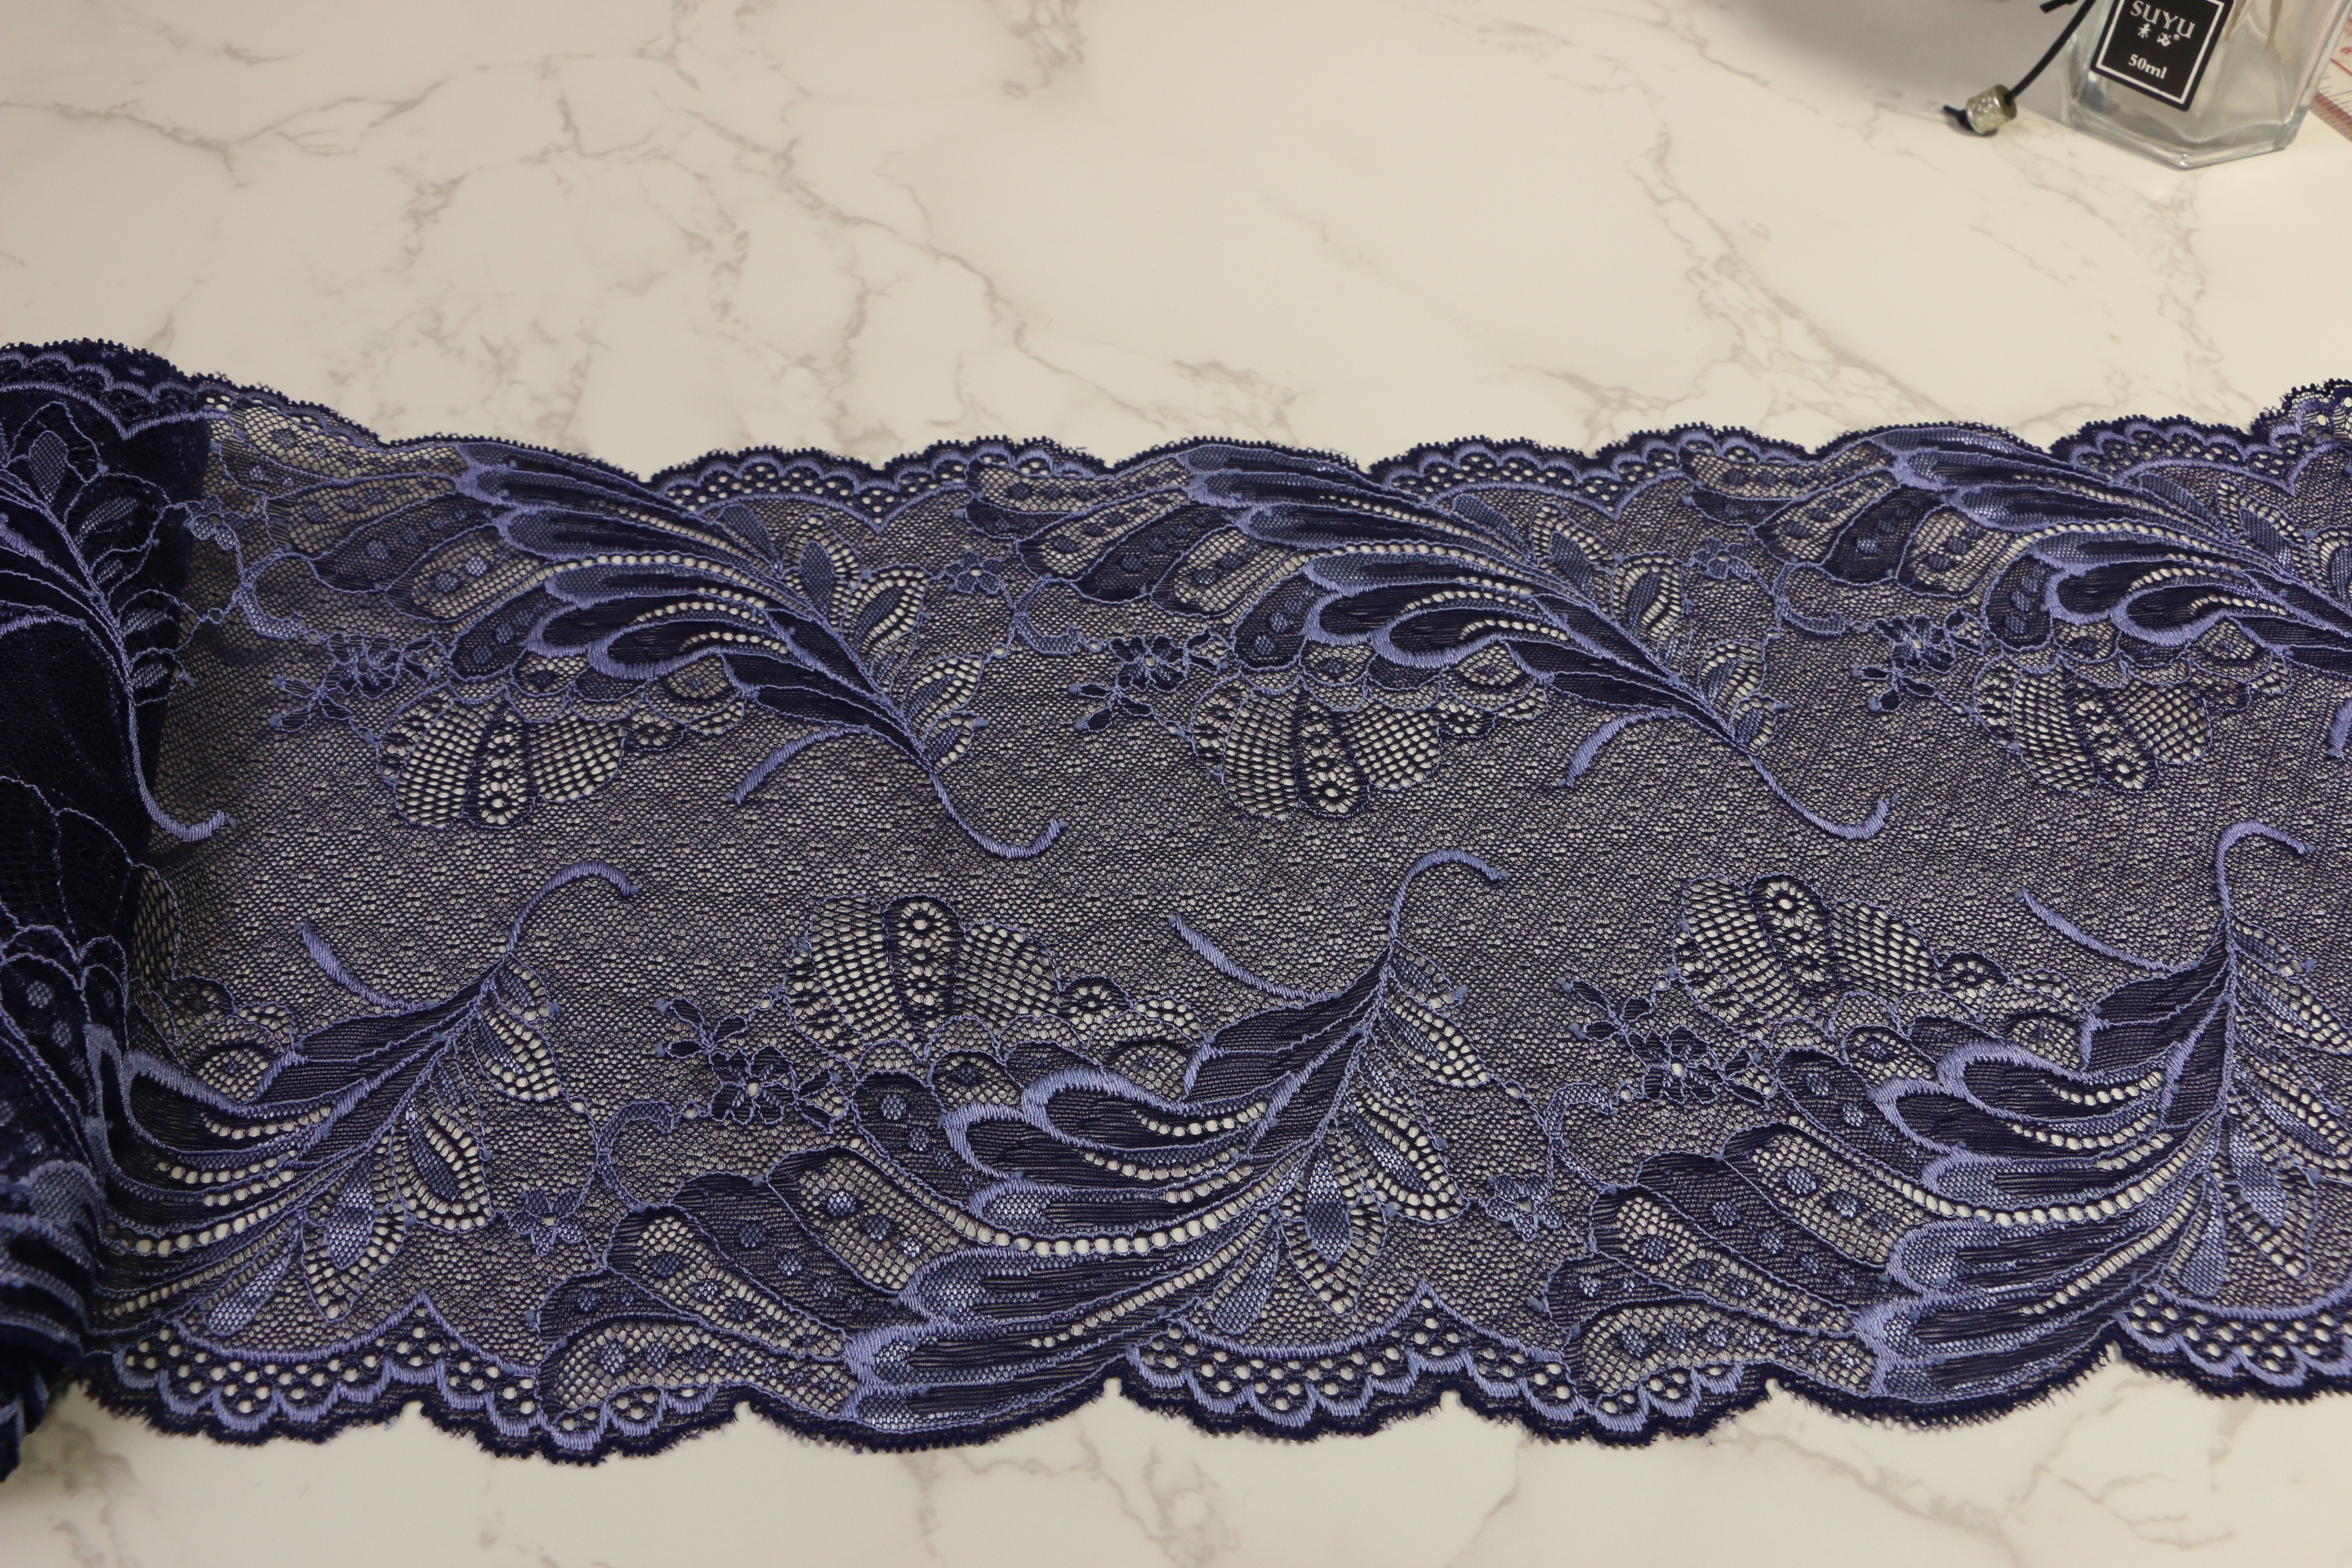  Navy Blue Lingerie Lace Trim 8.85in Width For Multiapplication Manufactures